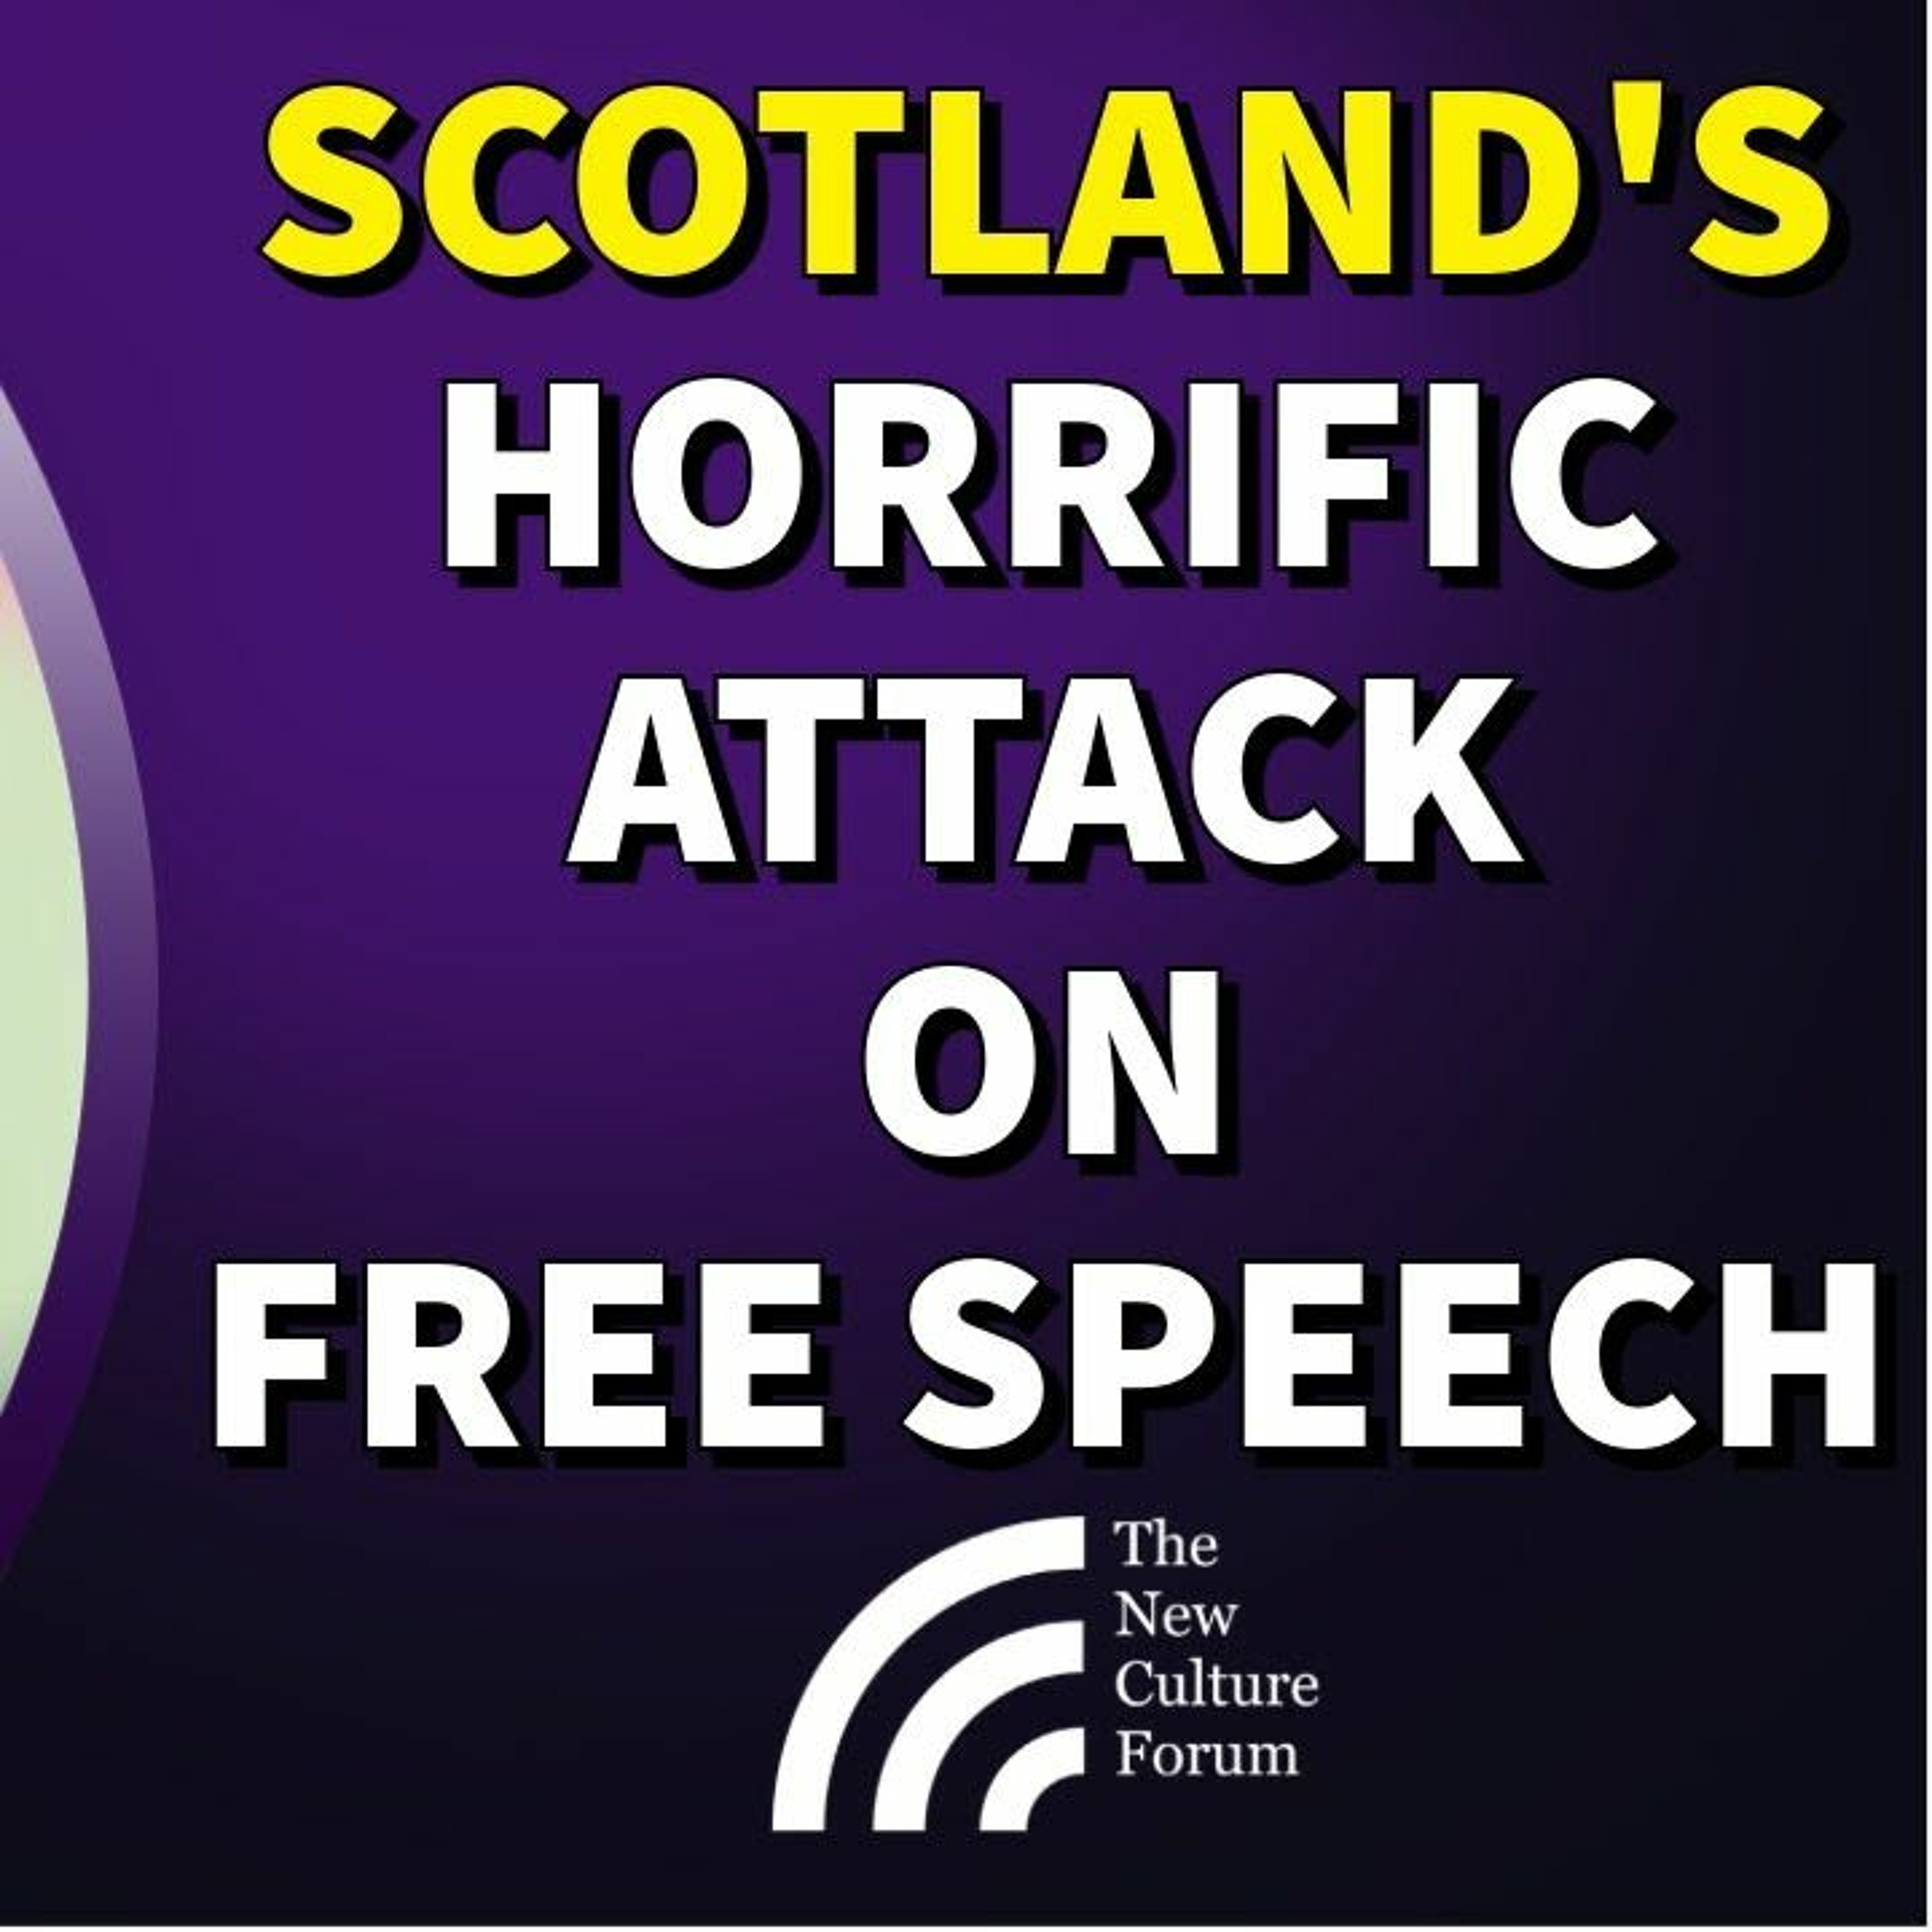 Arrested for Speaking in Your Own Home? Scotland’s Authoritarian Free Speech Crackdown